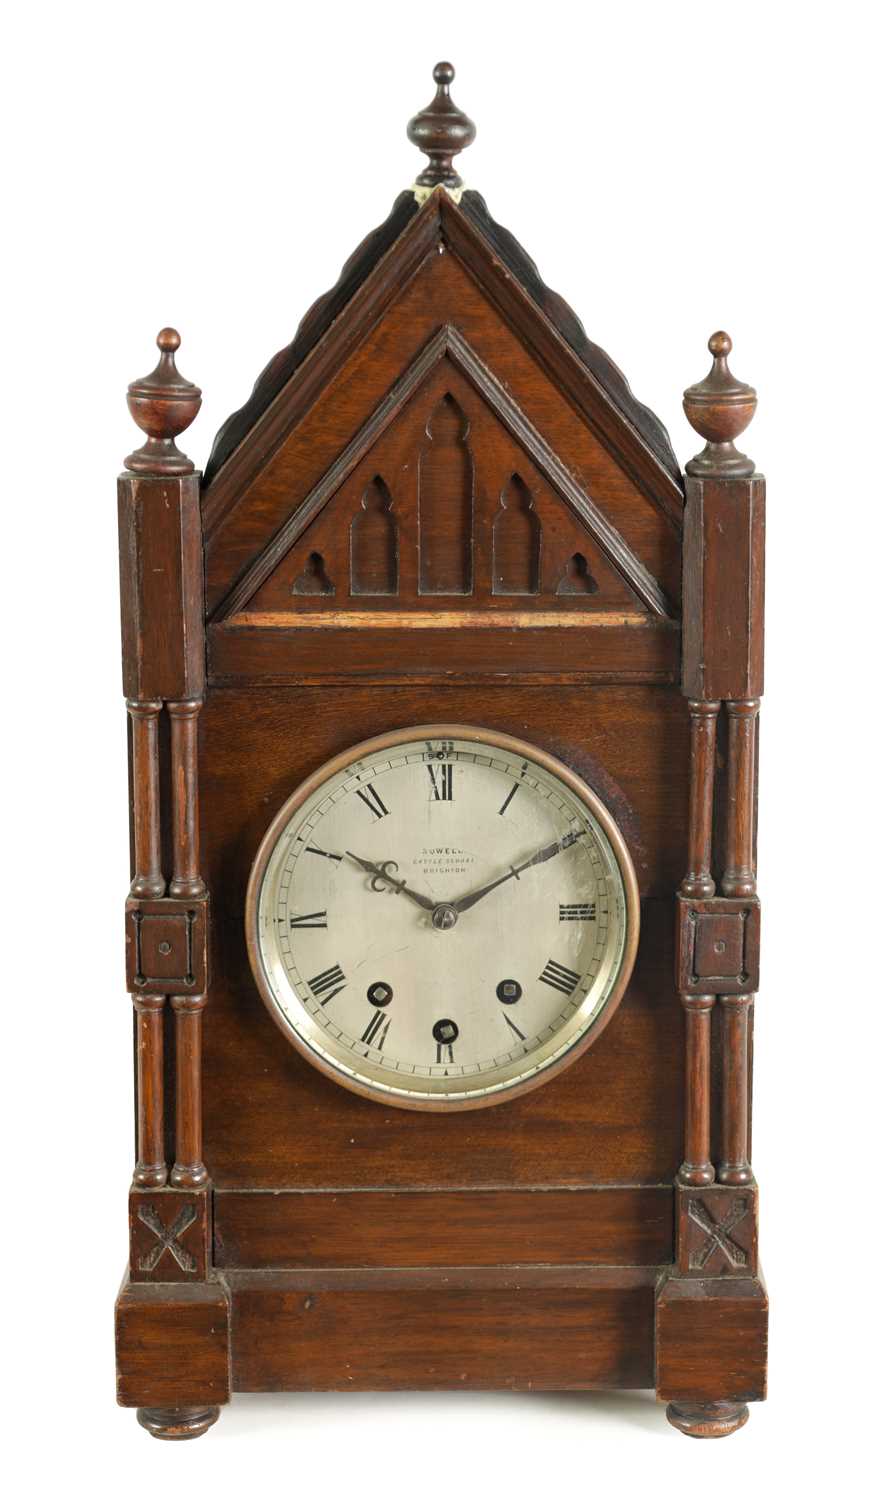 ROWELL, BRIGHTON. A LATE 19TH CENTURY QUARTER CHIMING EIGHT BELL BRACKET CLOCK